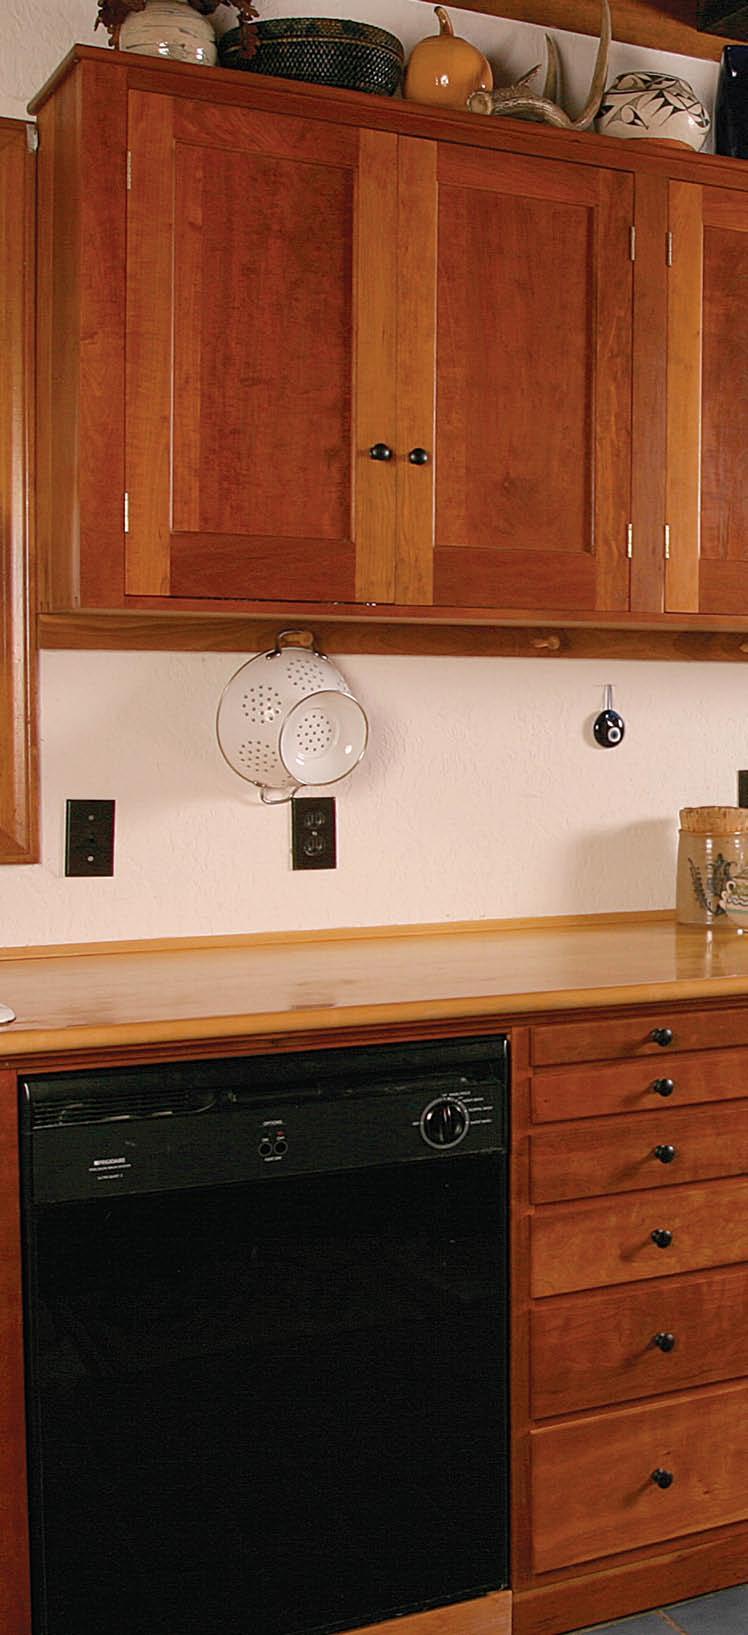 they are well worth preserving, restoring their tiled or linoleum countertops as needed), consider making new base cabinets with today s standard height of 36 in. or even 38 in.